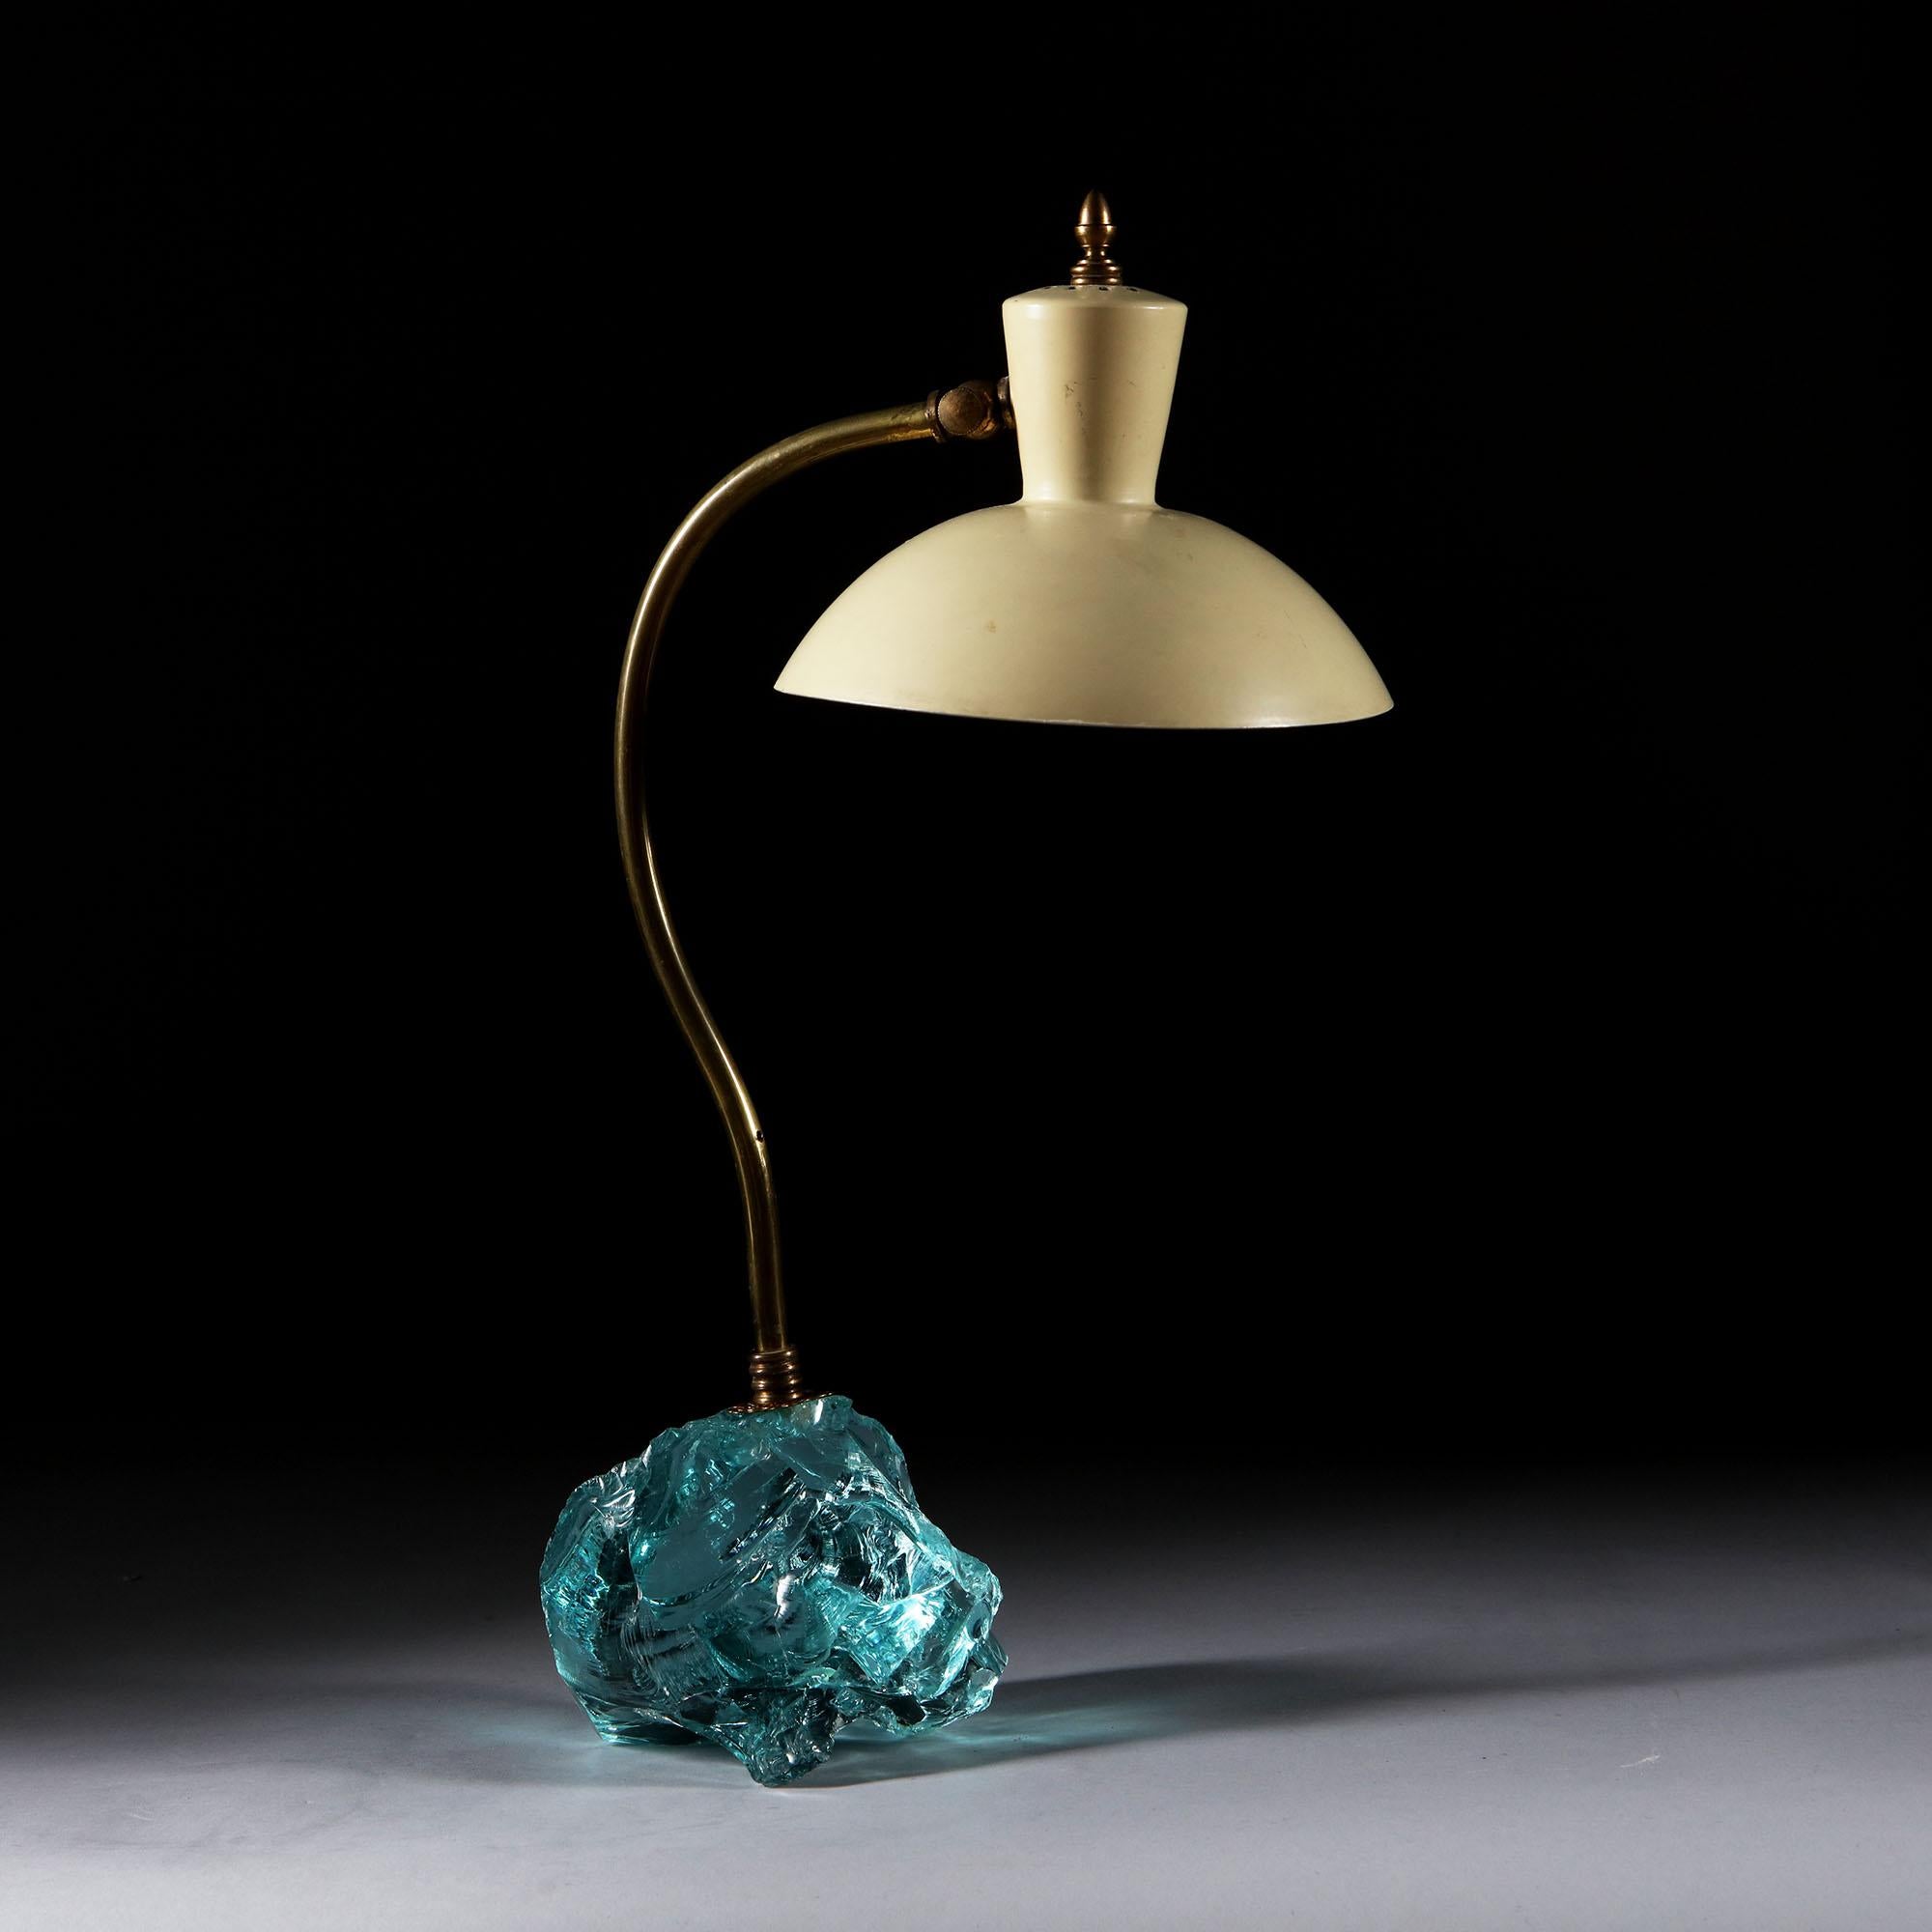 An mid-20th century, Italian desk lamp with unusual glass shard base, with curved brass stem and adjustable enamel shade surmounted with a brass finial.